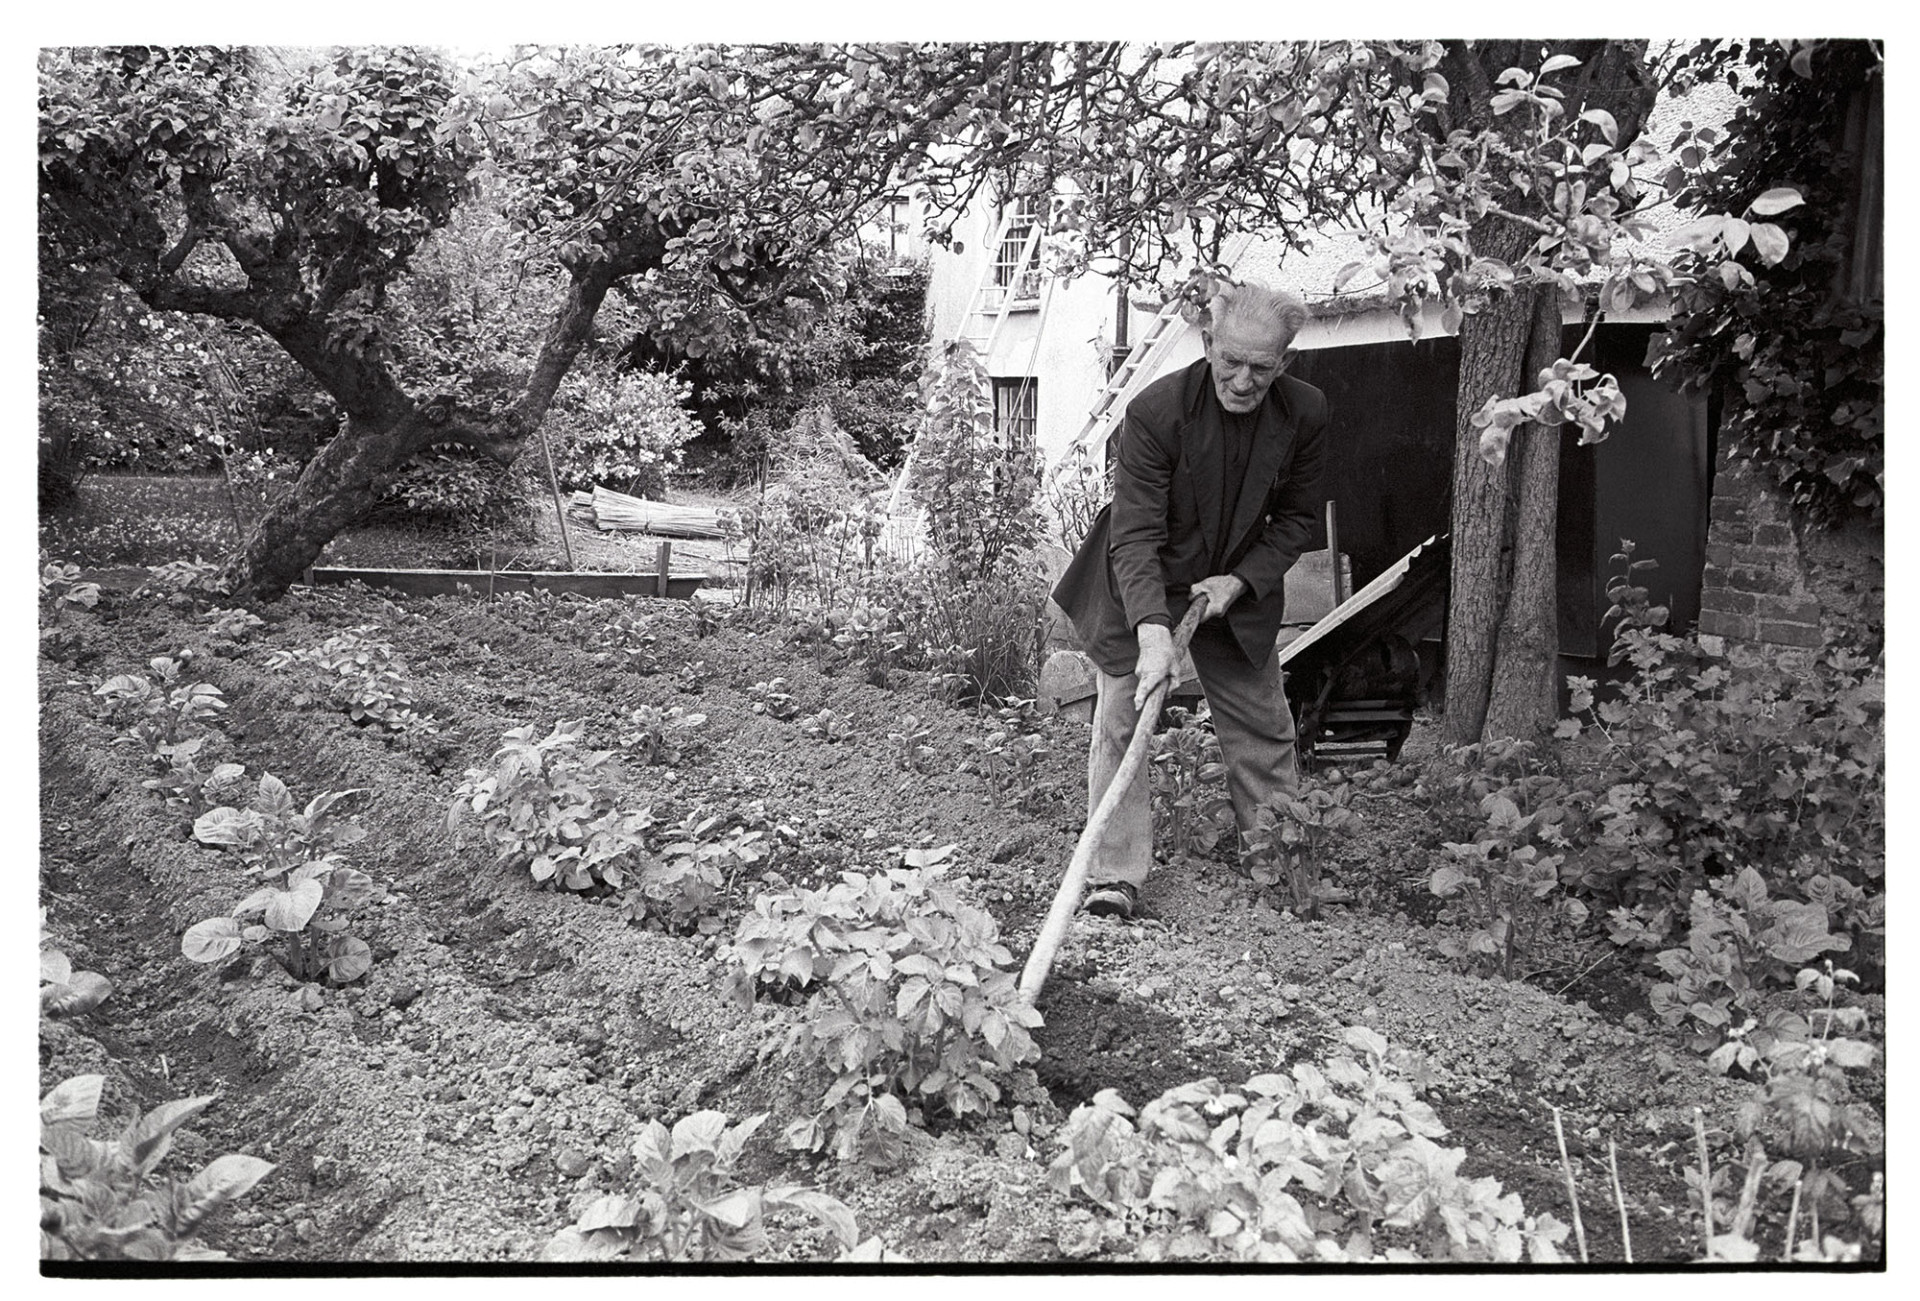 Men hoeing garden potatoes. 
[Jim Hutchins hoeing rows of potatoes in his garden in Dolton. Fruit trees can be seen in the background.]